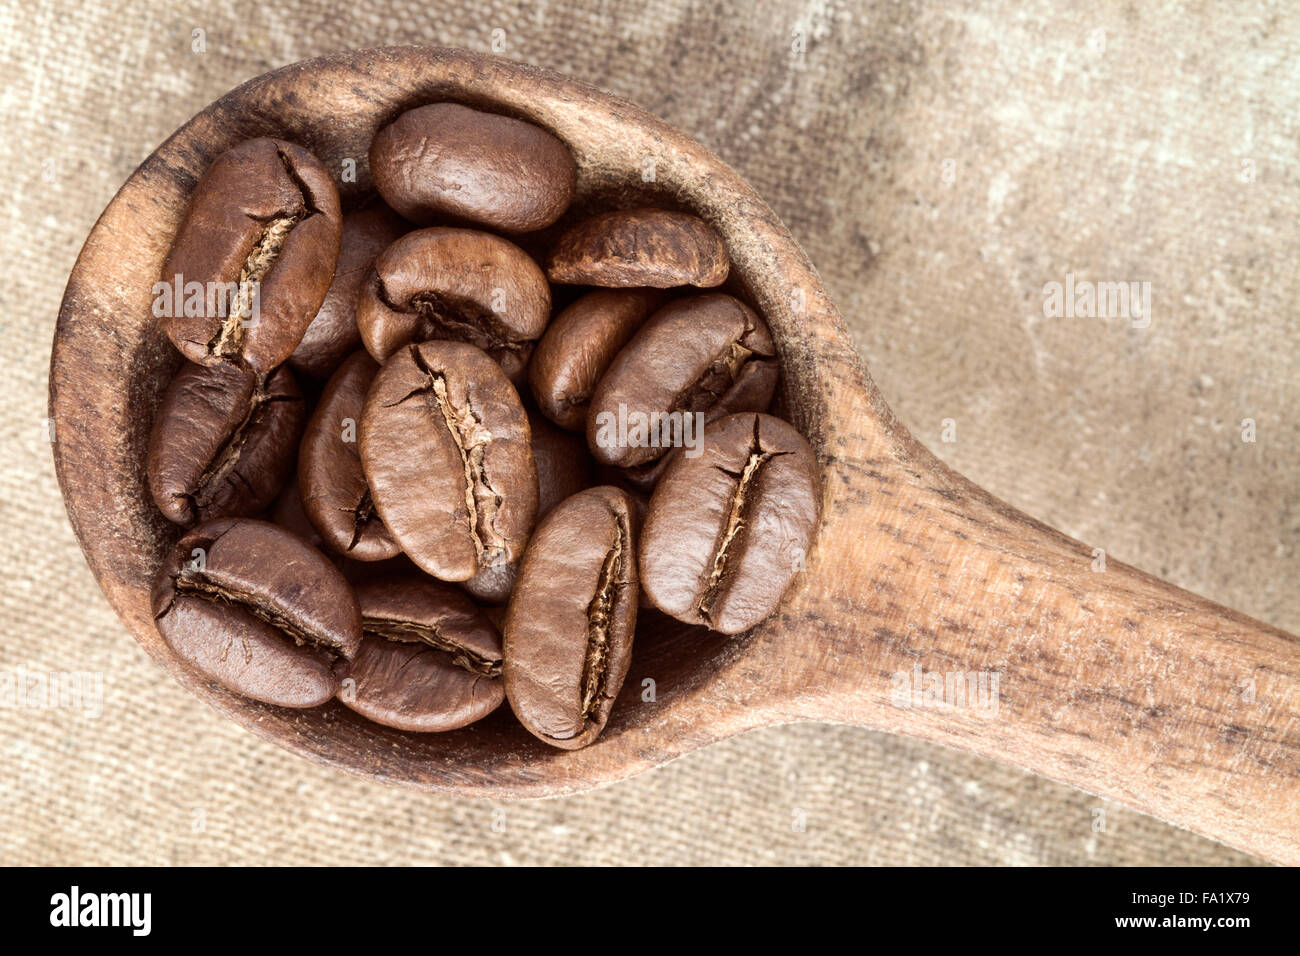 Spoon with coffee crop beans, top view Stock Photo